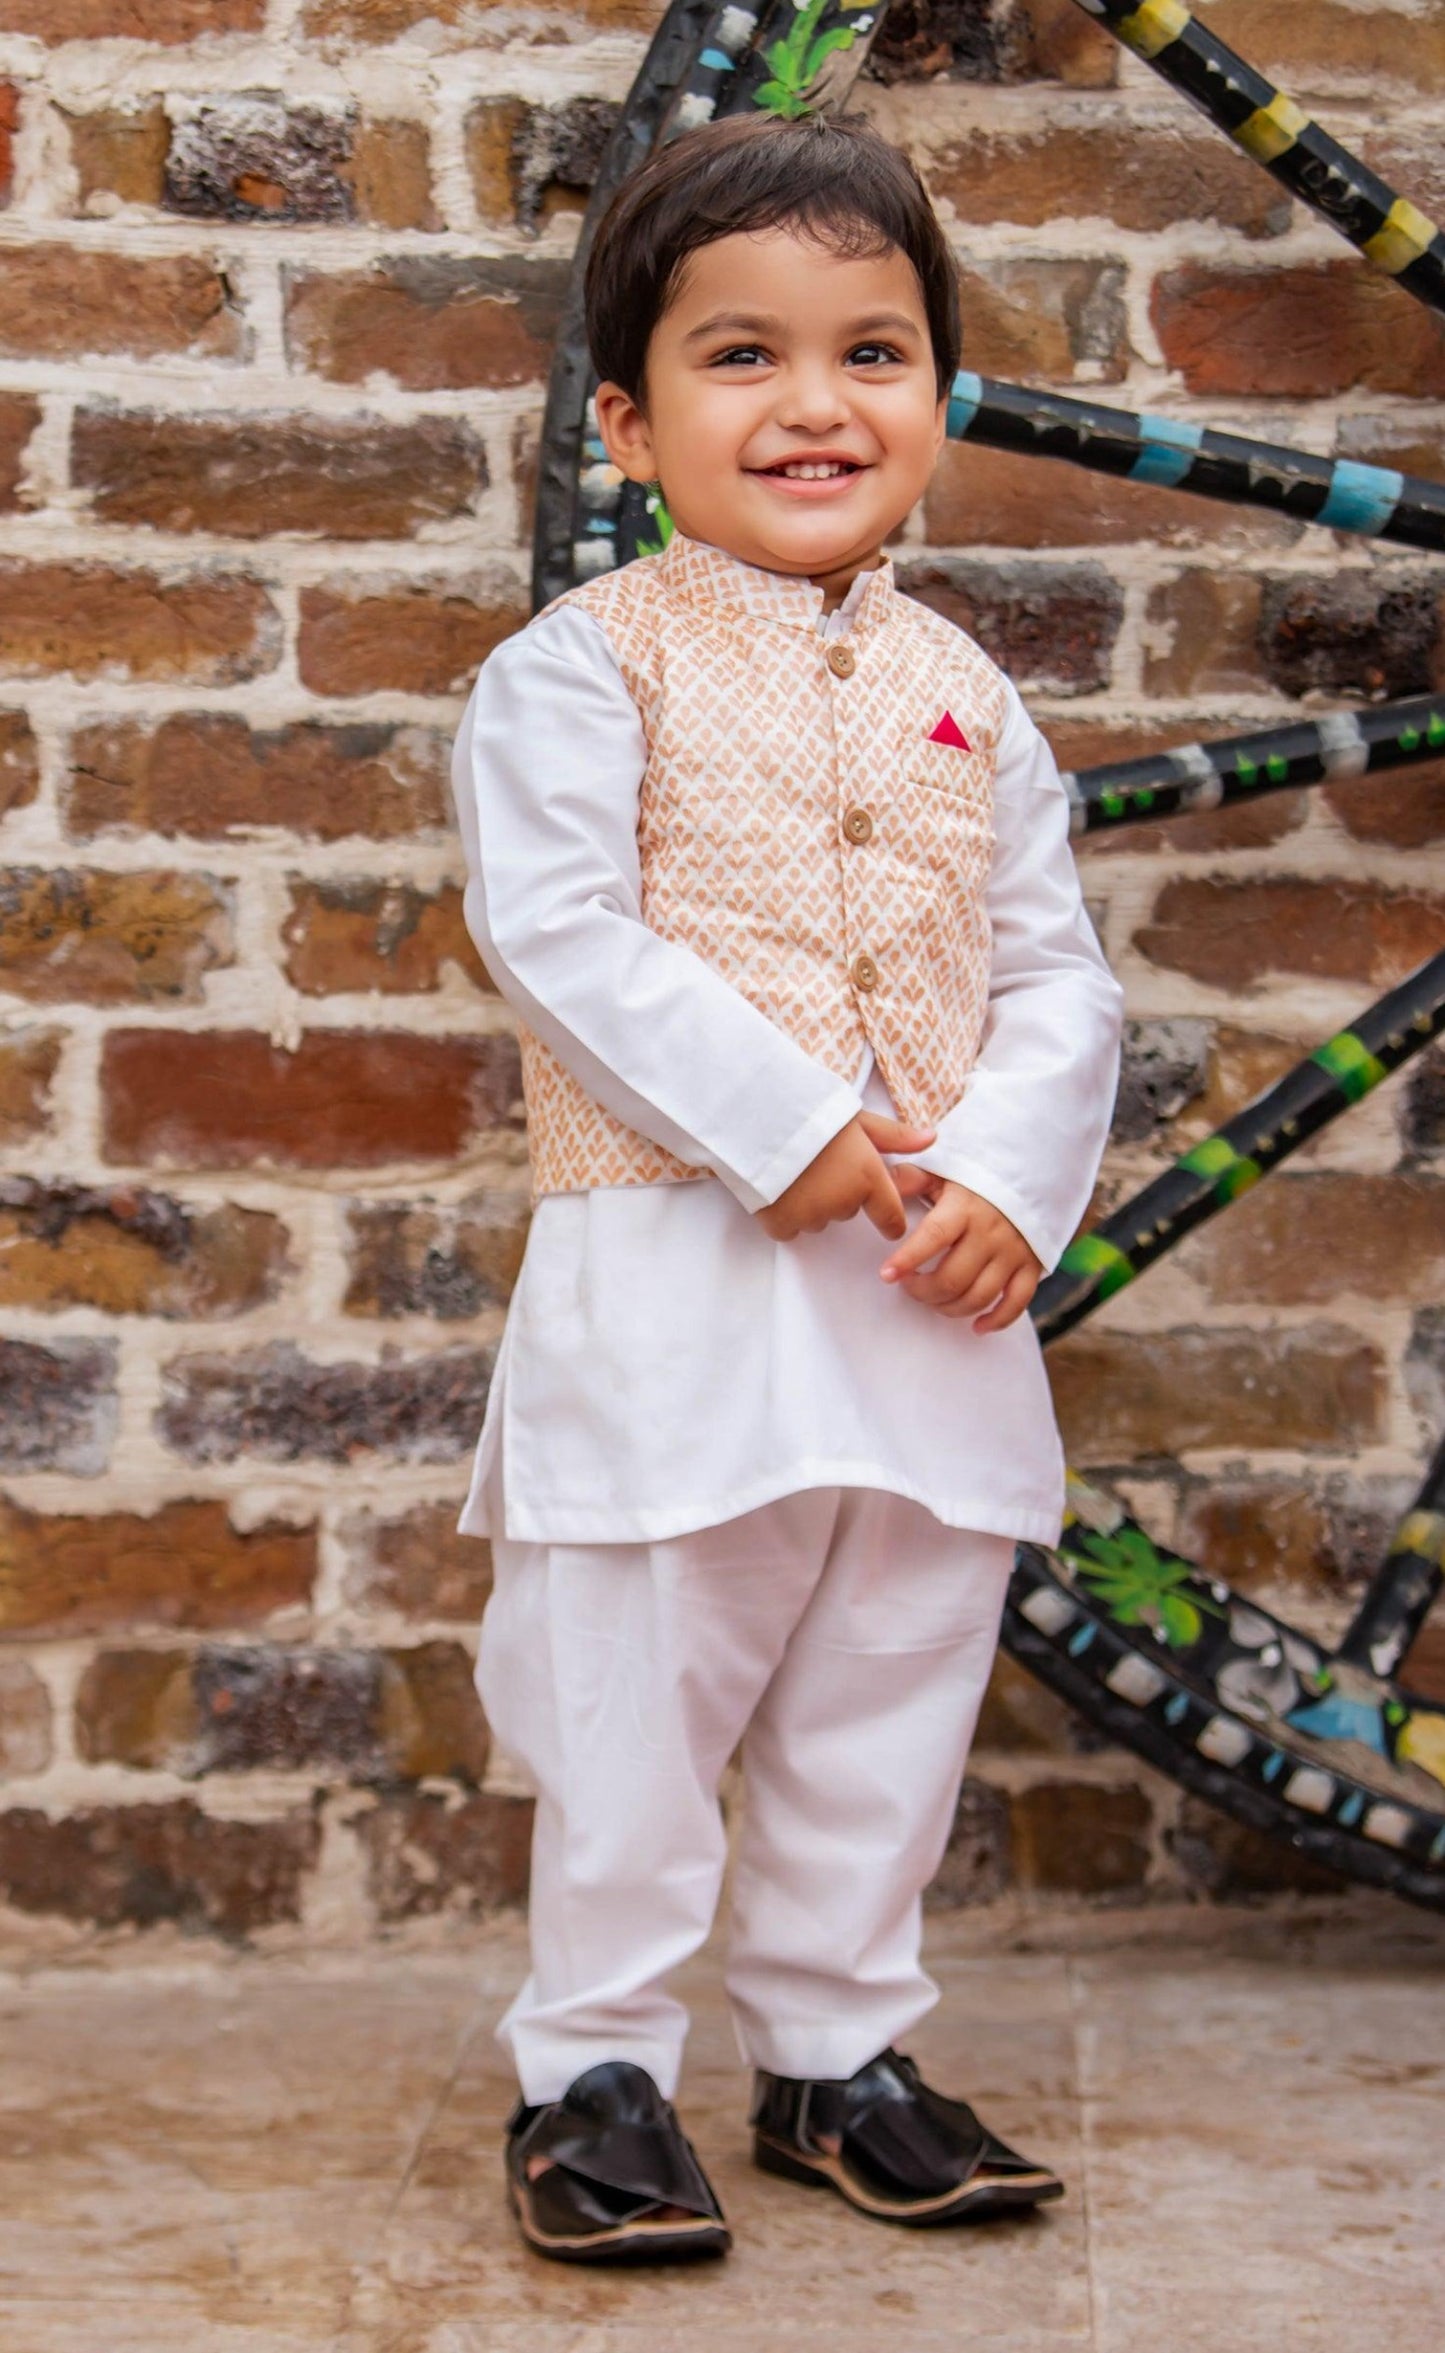 Pearl II - Boys clothing Price in Pakistan boys waistcoat Cotton cultural off white